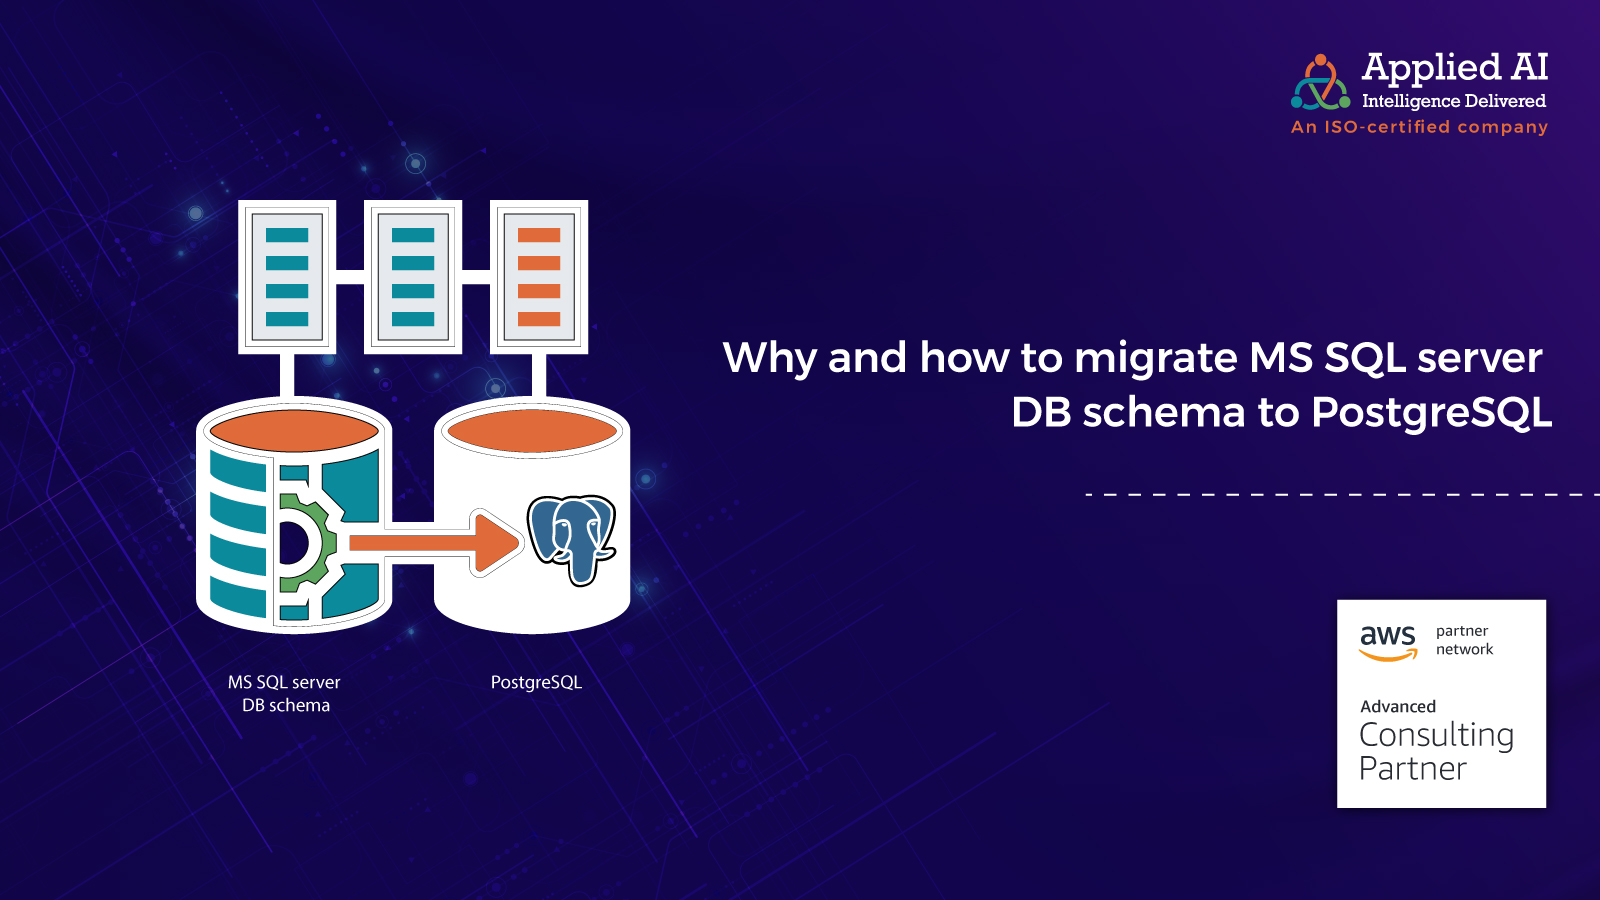 Why And How To Migrate MS SQL Server DB Schema to postgreSQL